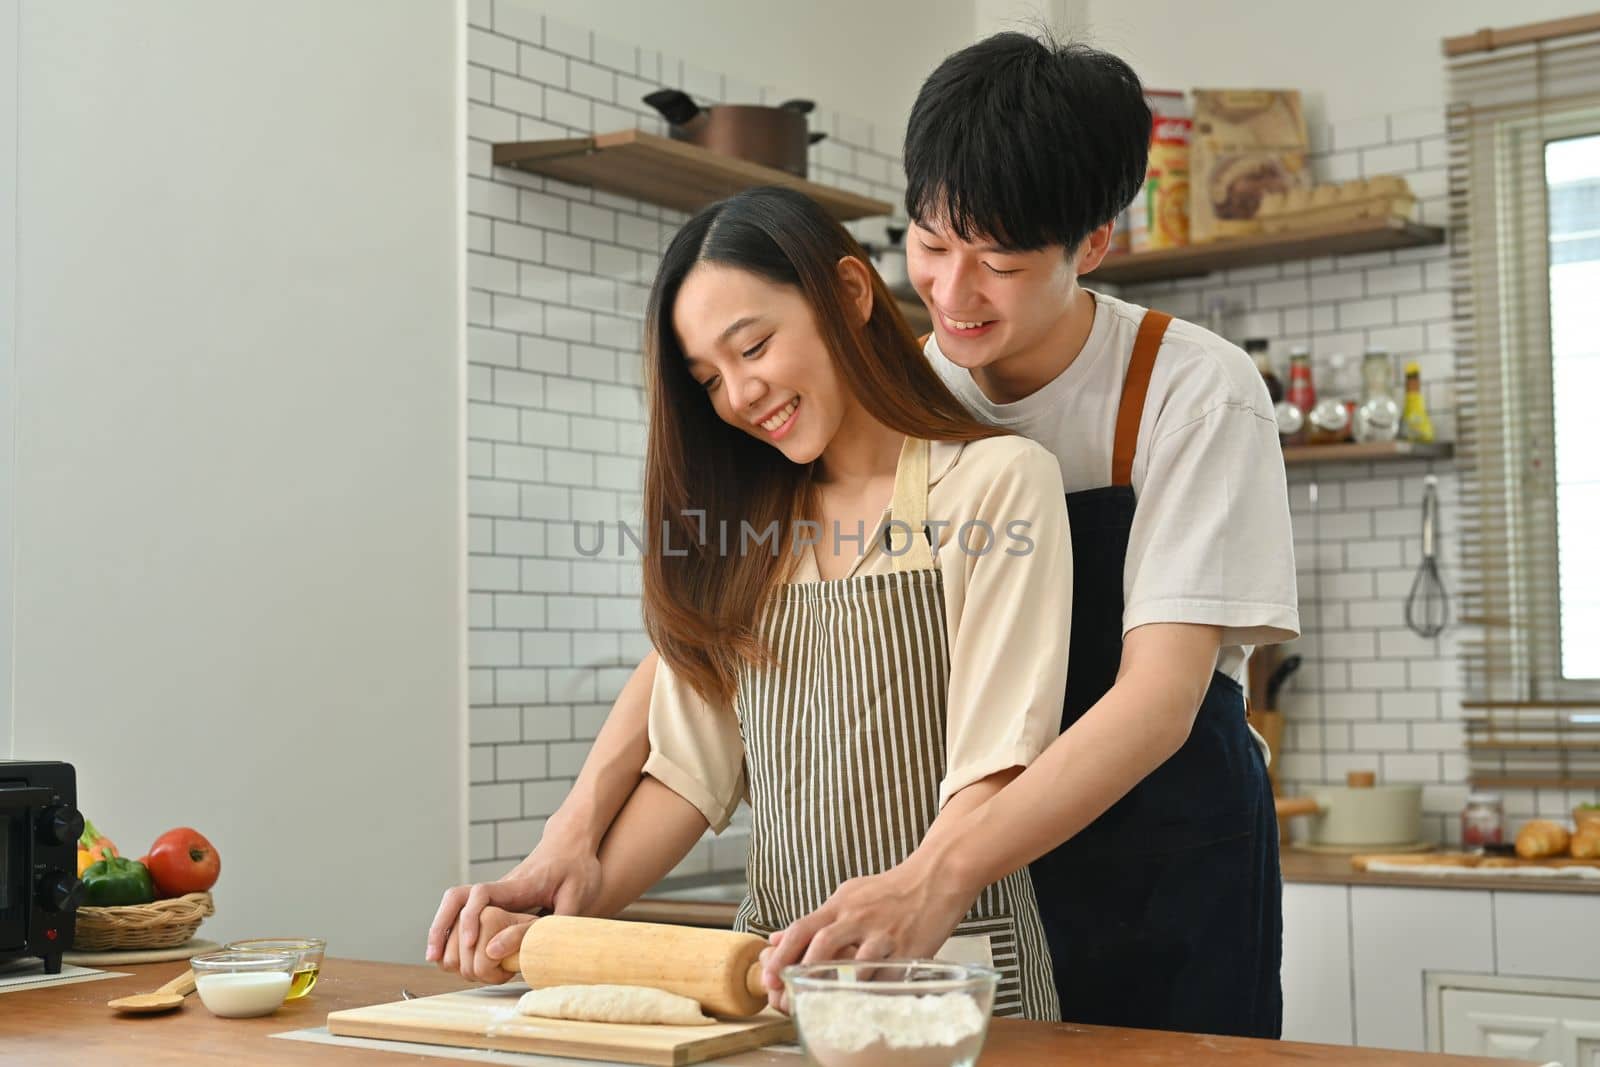 Romantic young couple wearing aprons preparing homemade pastry, enjoying leisure time together at home by prathanchorruangsak